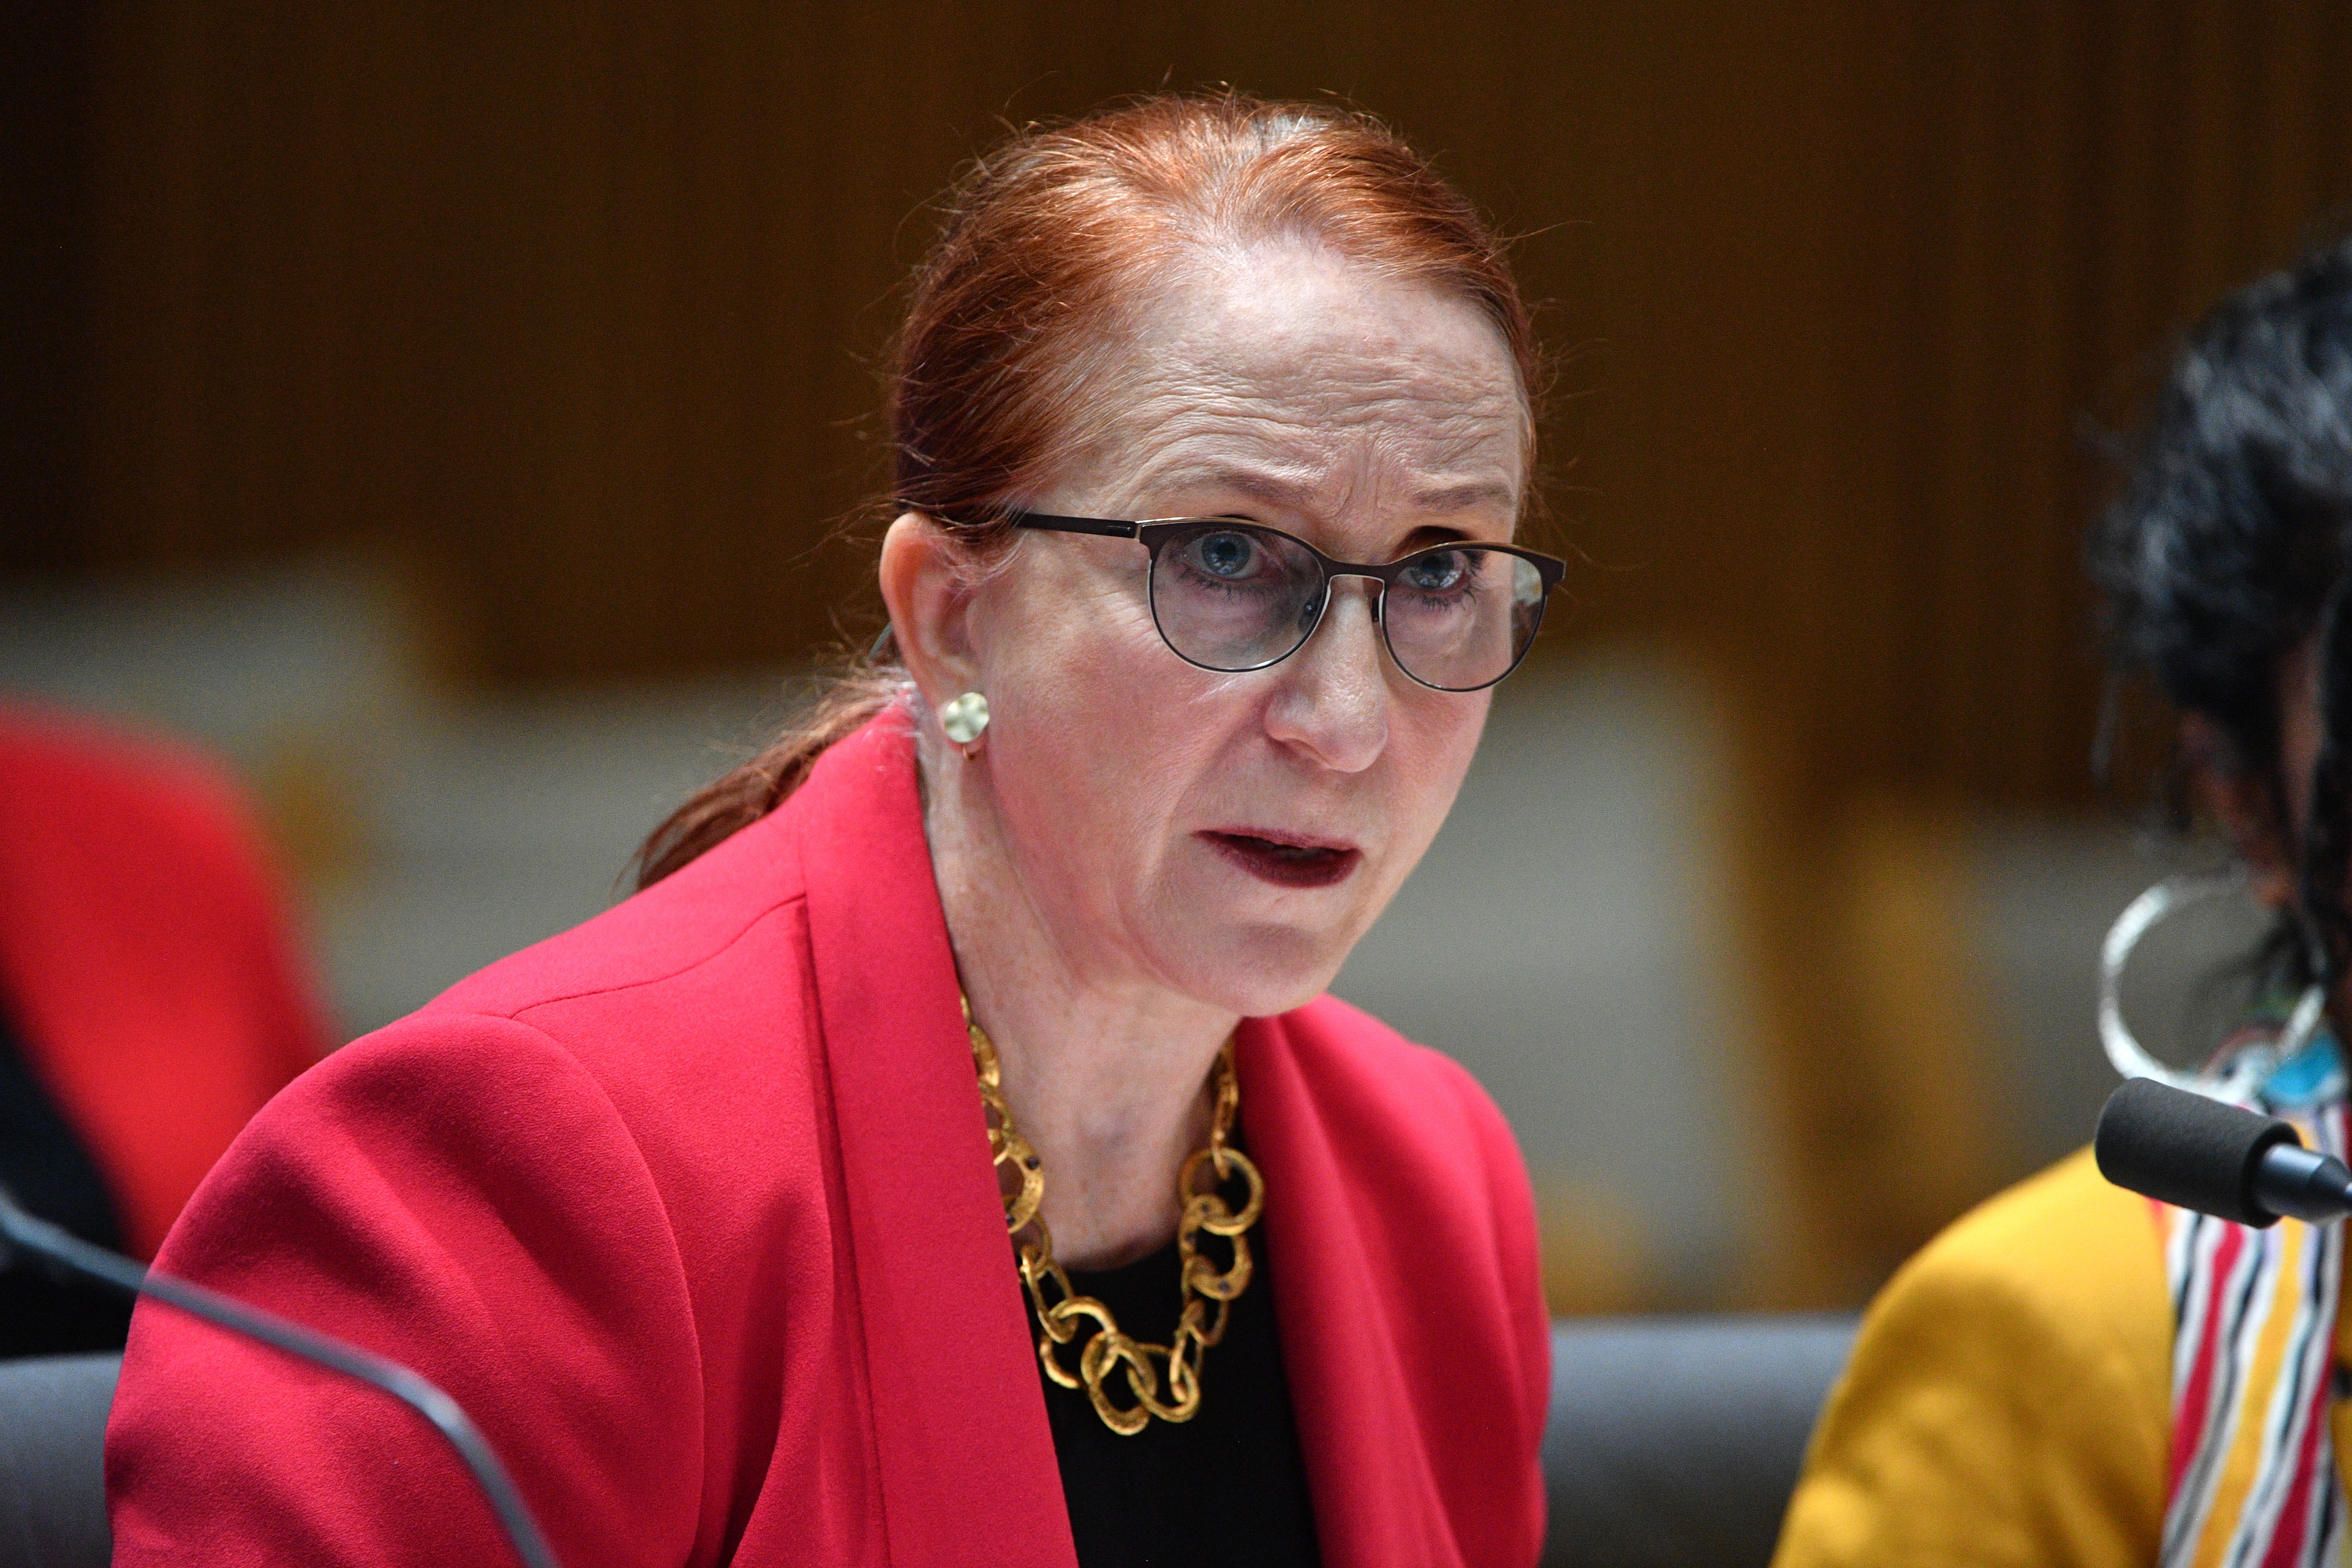 Human Rights Commission President Rosalind Croucher appears at a Senate estimates hearing at Parliament House in Canberra.